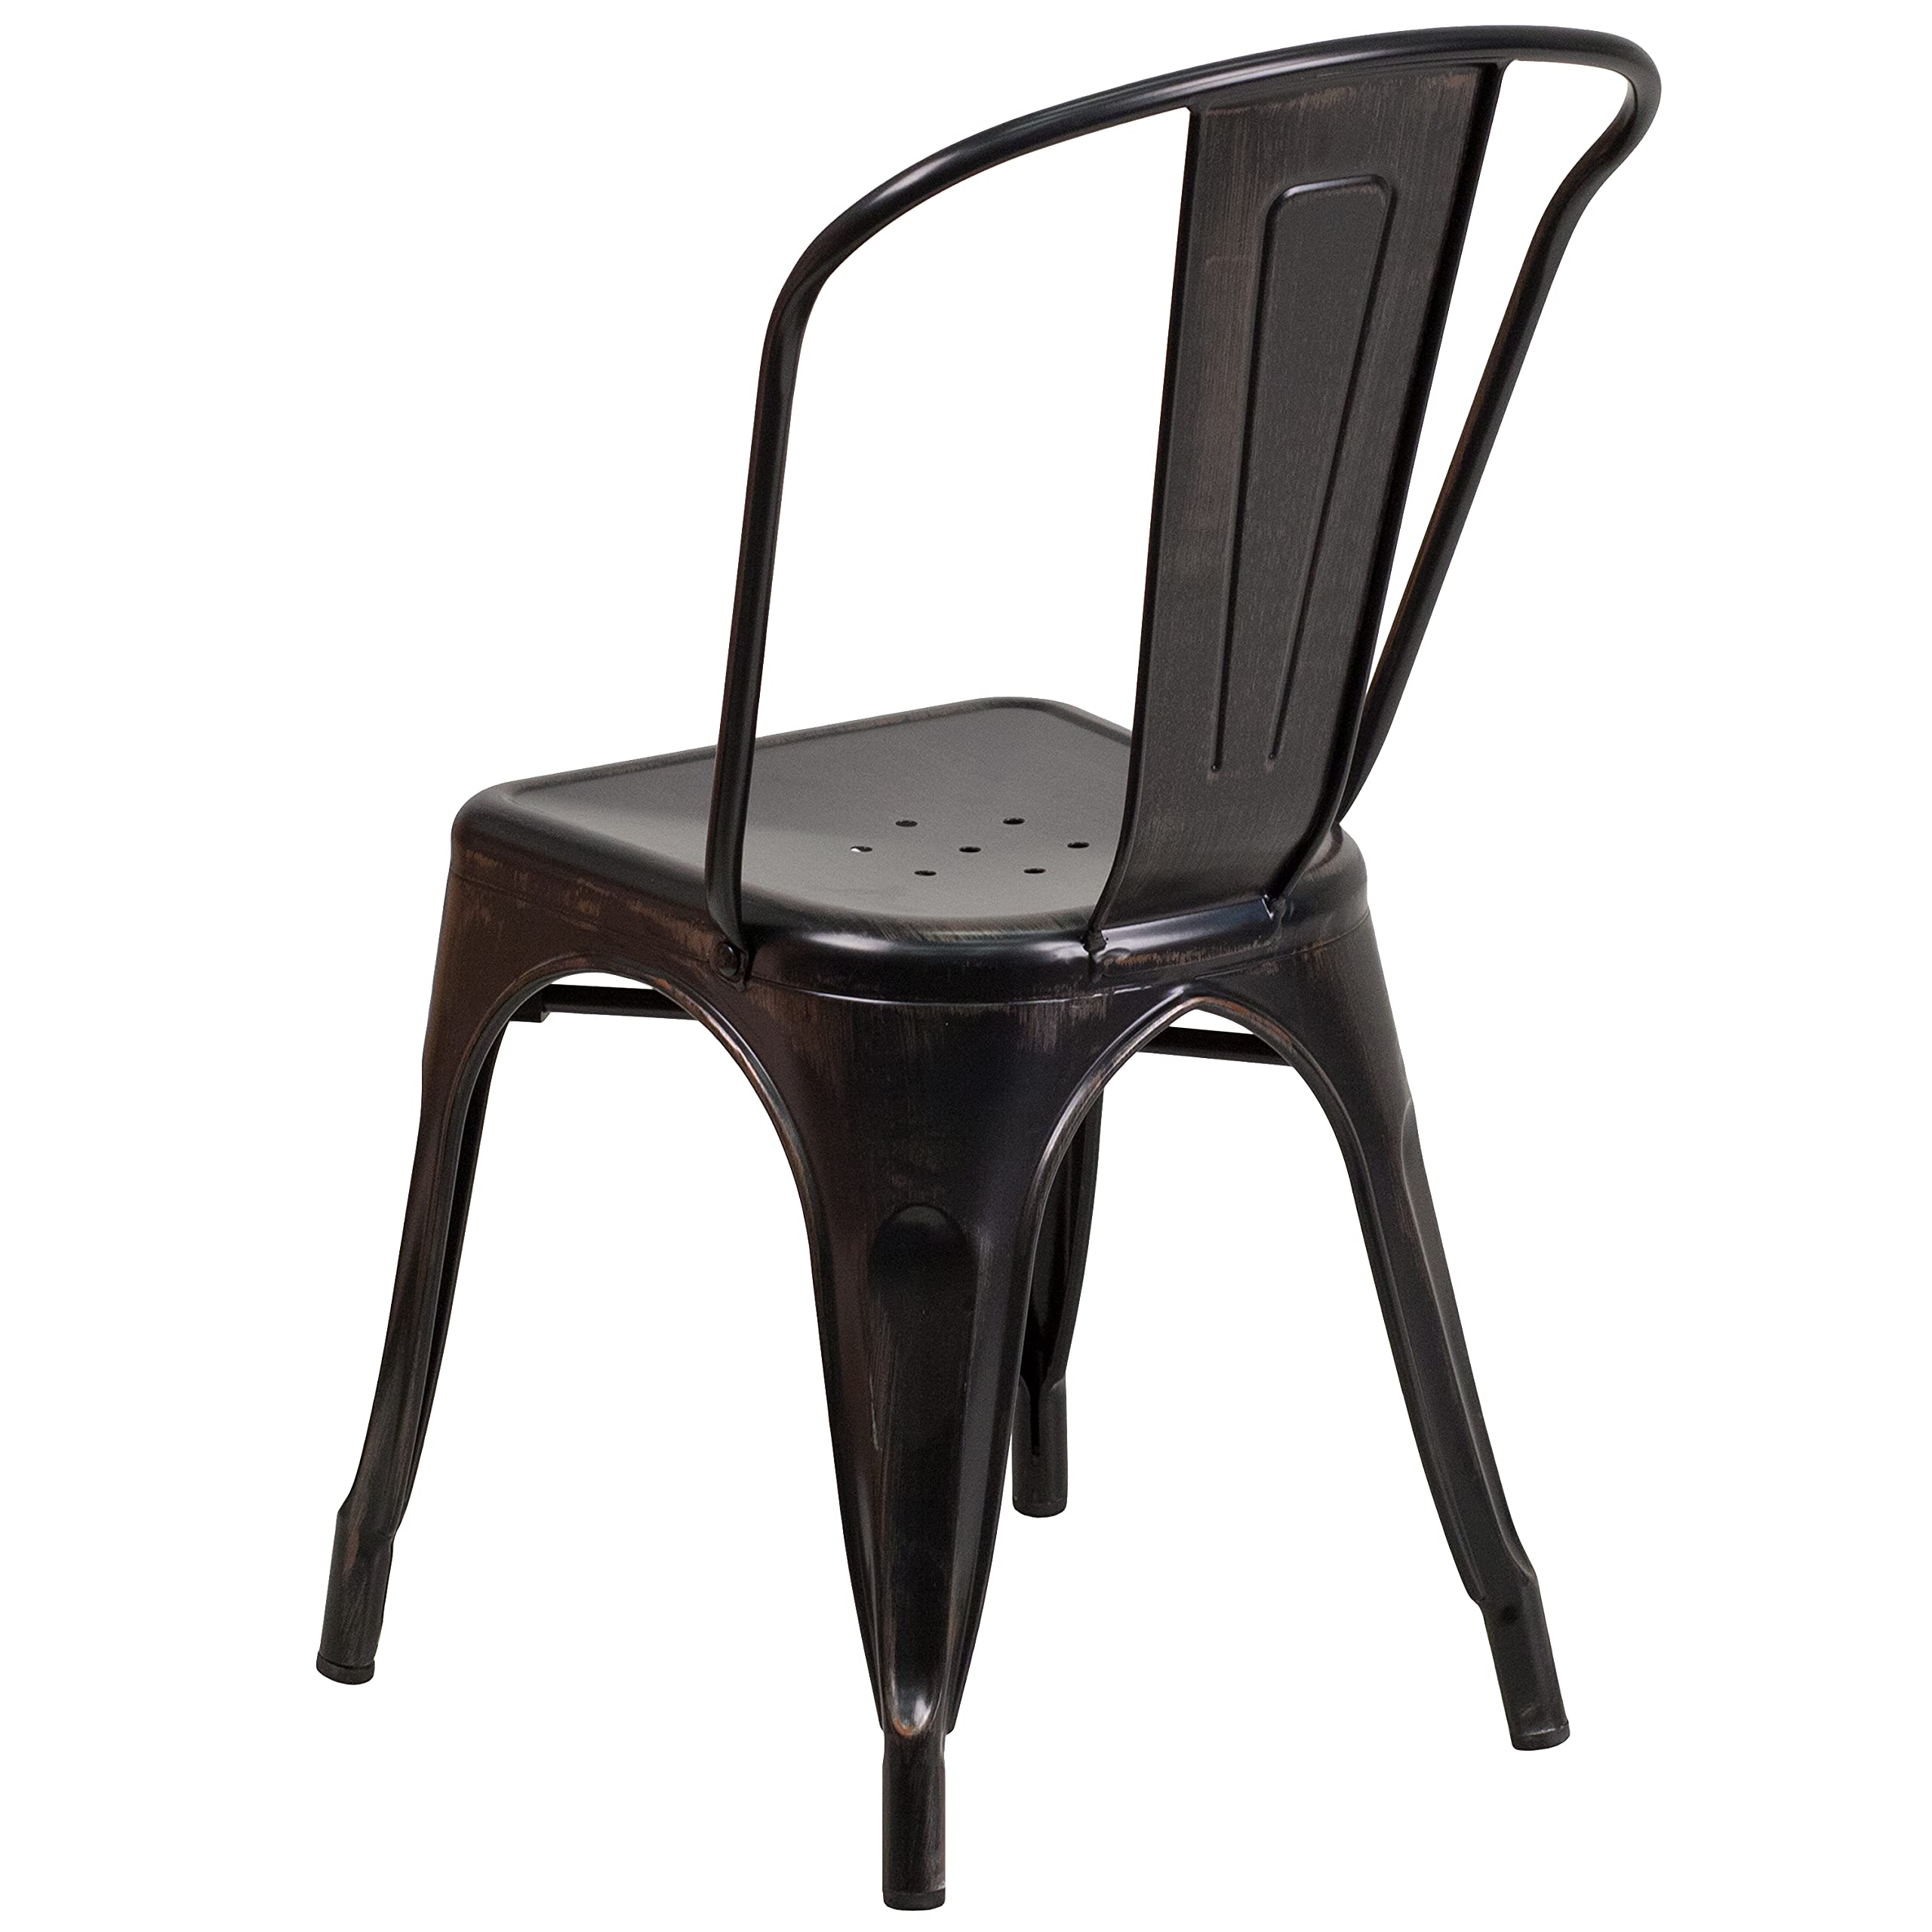 Merrick Lane Amsterdam Black-Antique Gold Metal Dining Chair with Curved Vertical Slatted Back and Square Seat